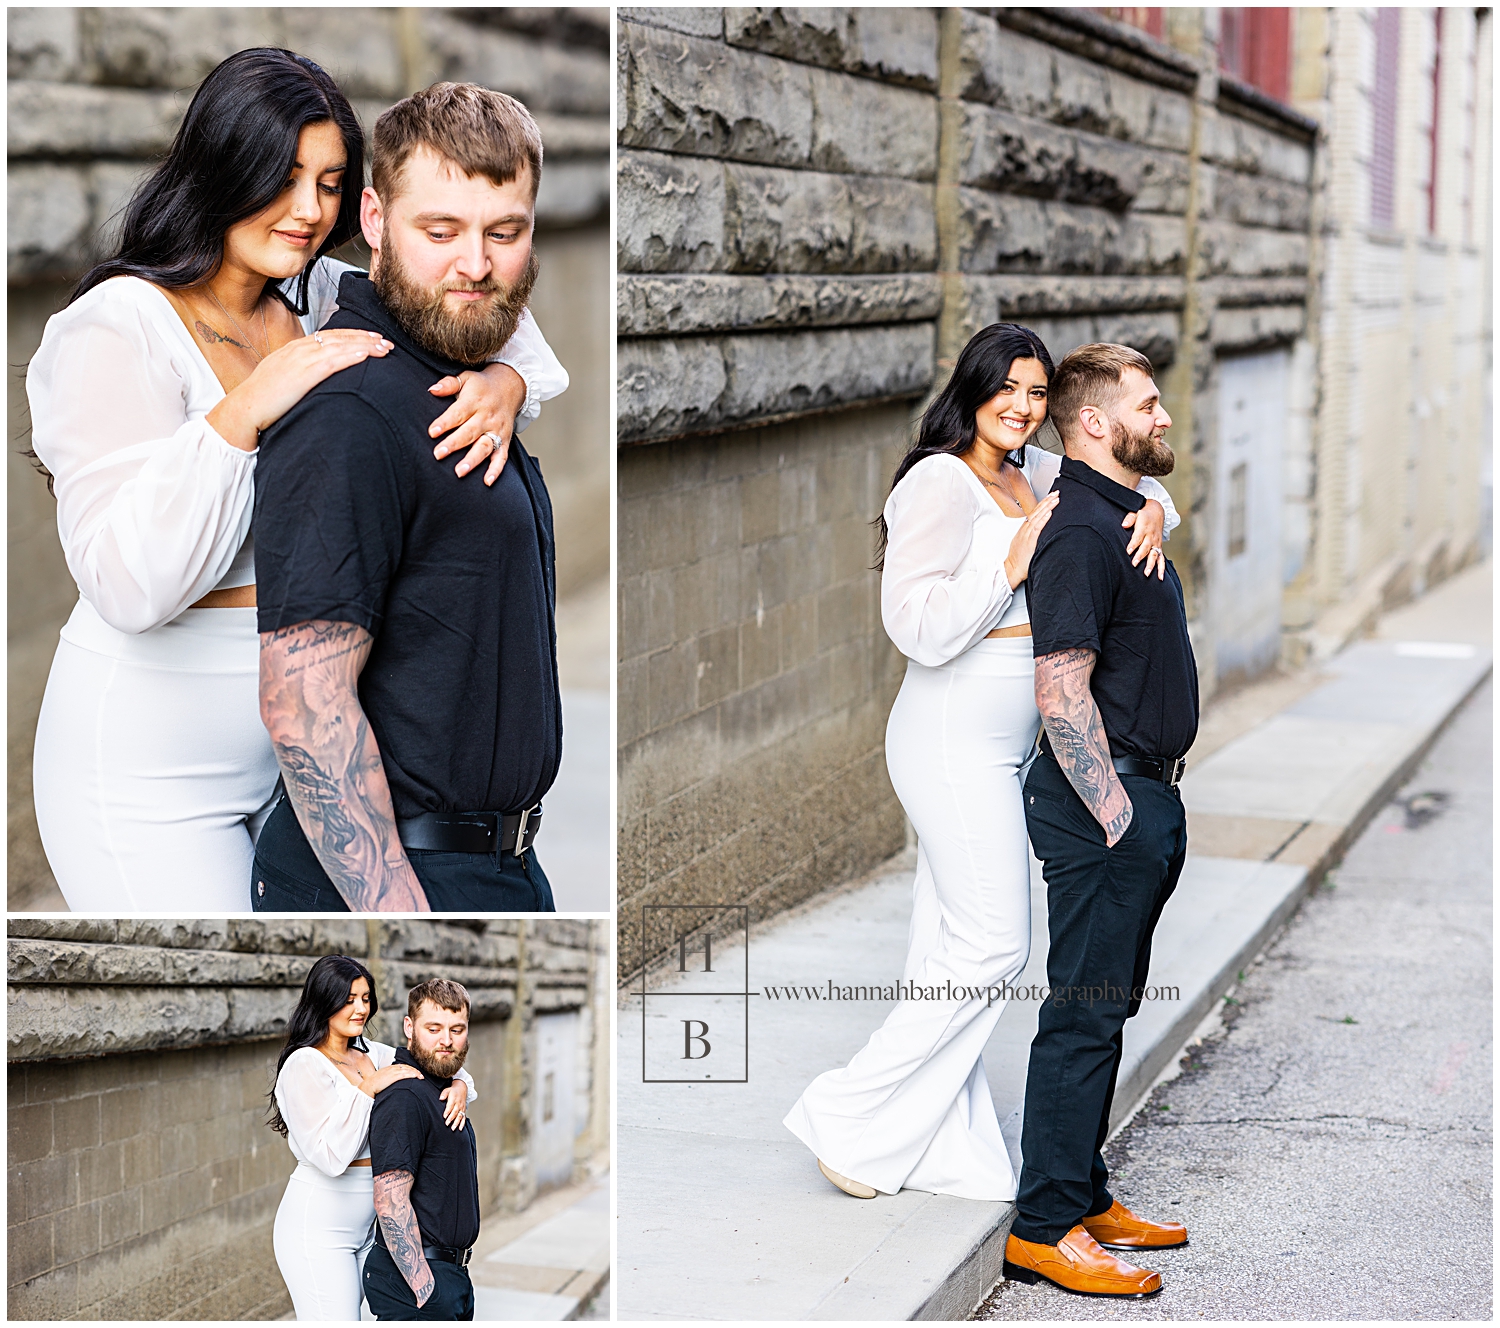 Women in white jumpsuit poses with fiance in alley.